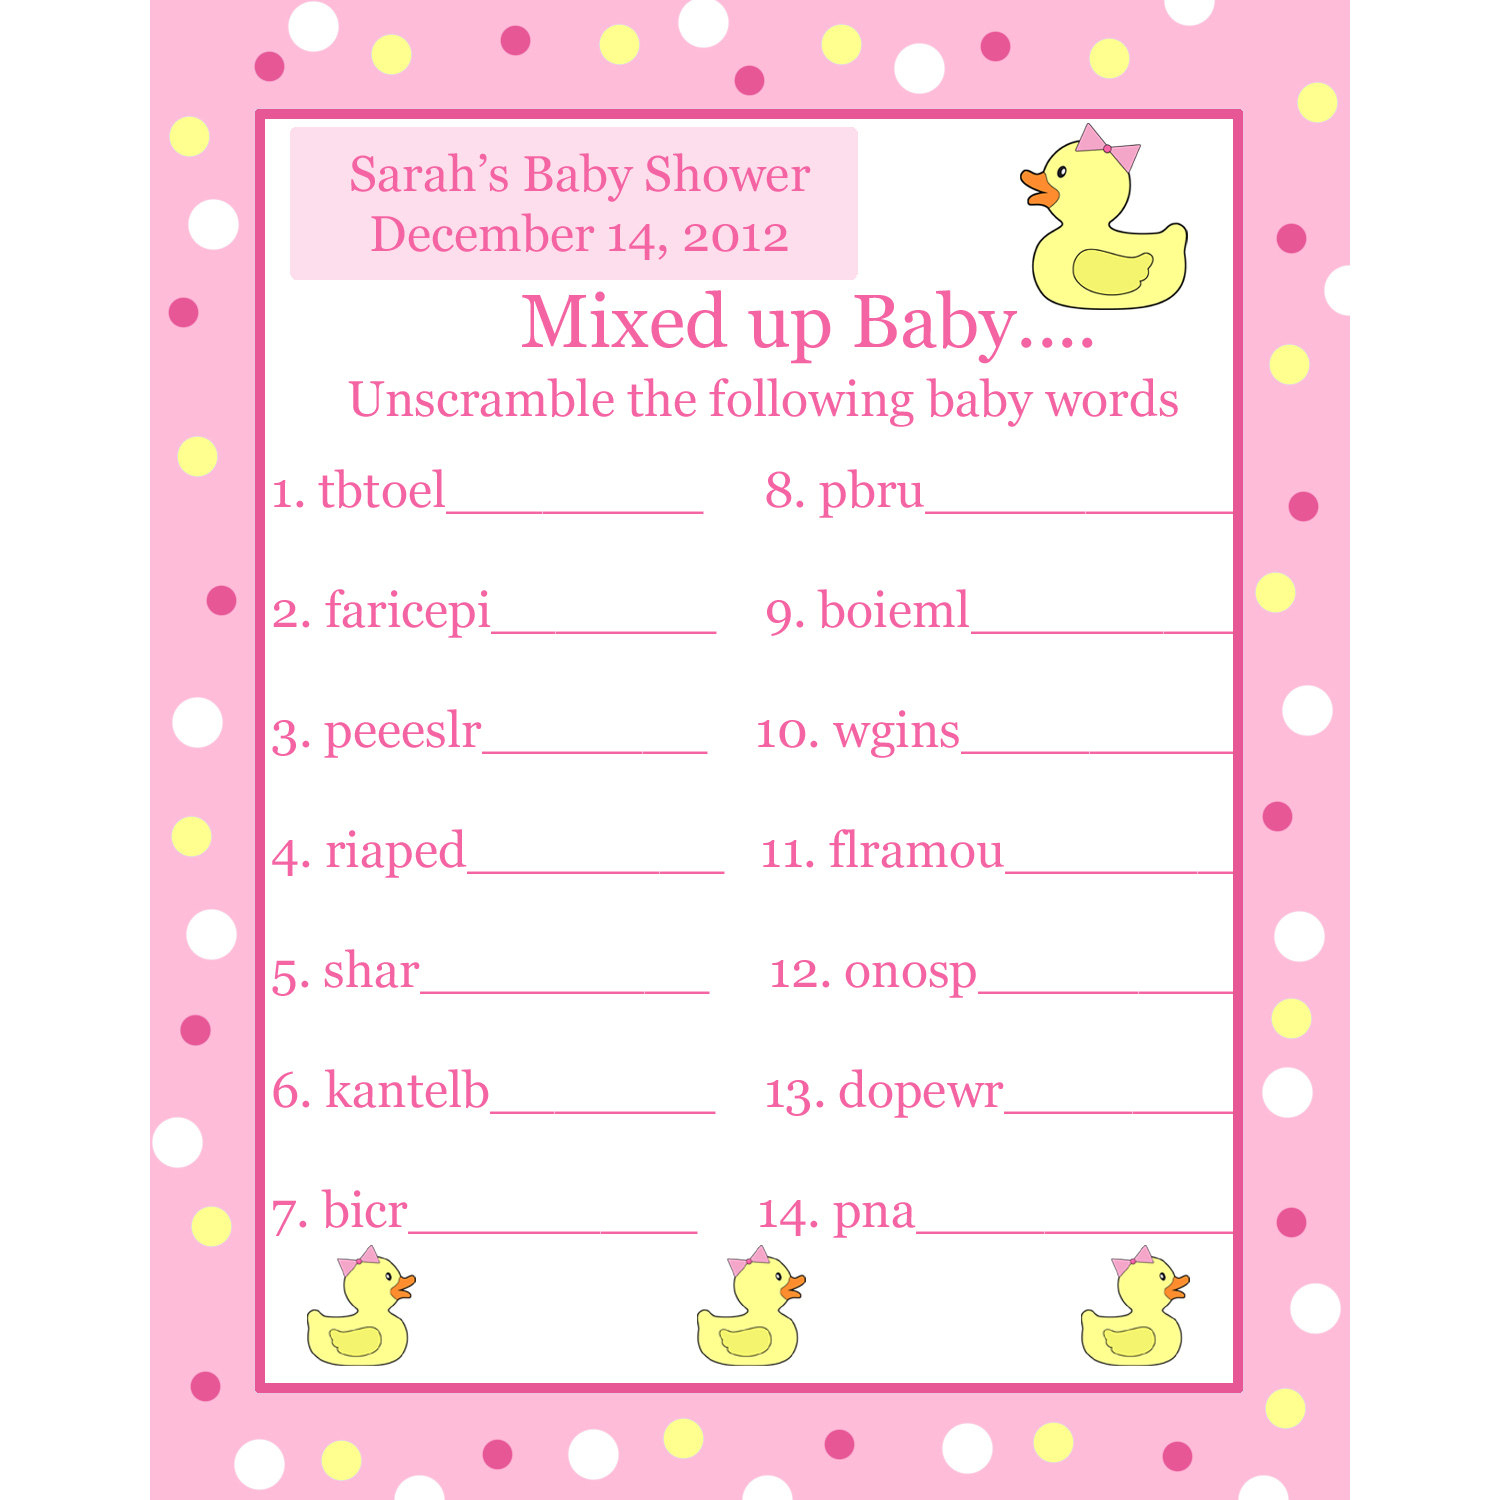 Photo : Free Printable Baby Shower Games Image - Free Printable Baby Shower Games In Spanish